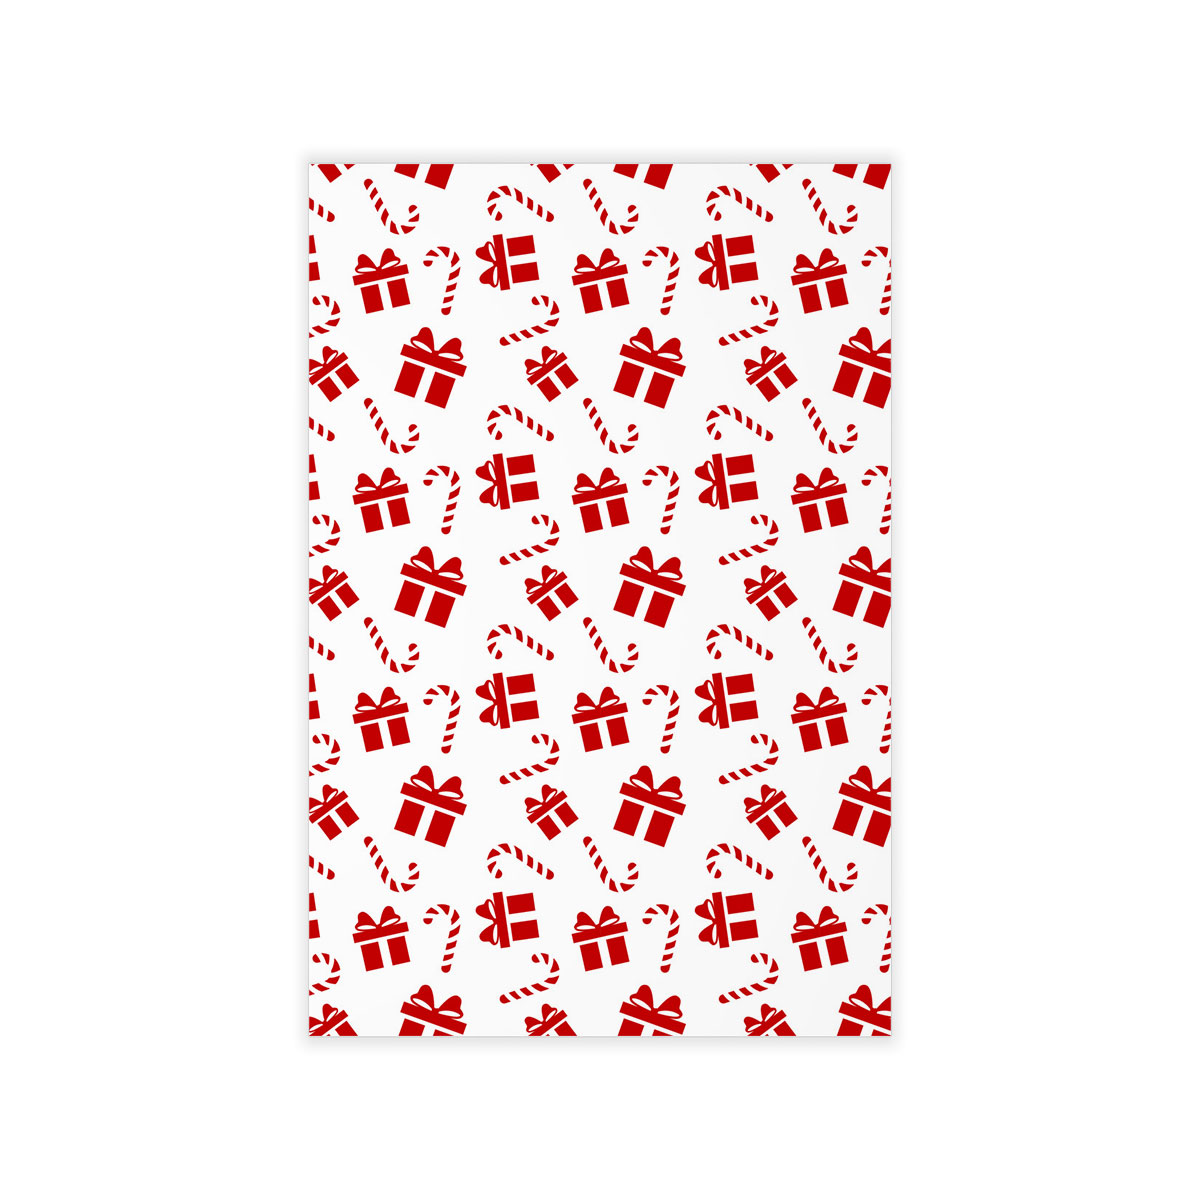 Christmas Gifts And Candy Canes Seamless White Pattern Wall Decals